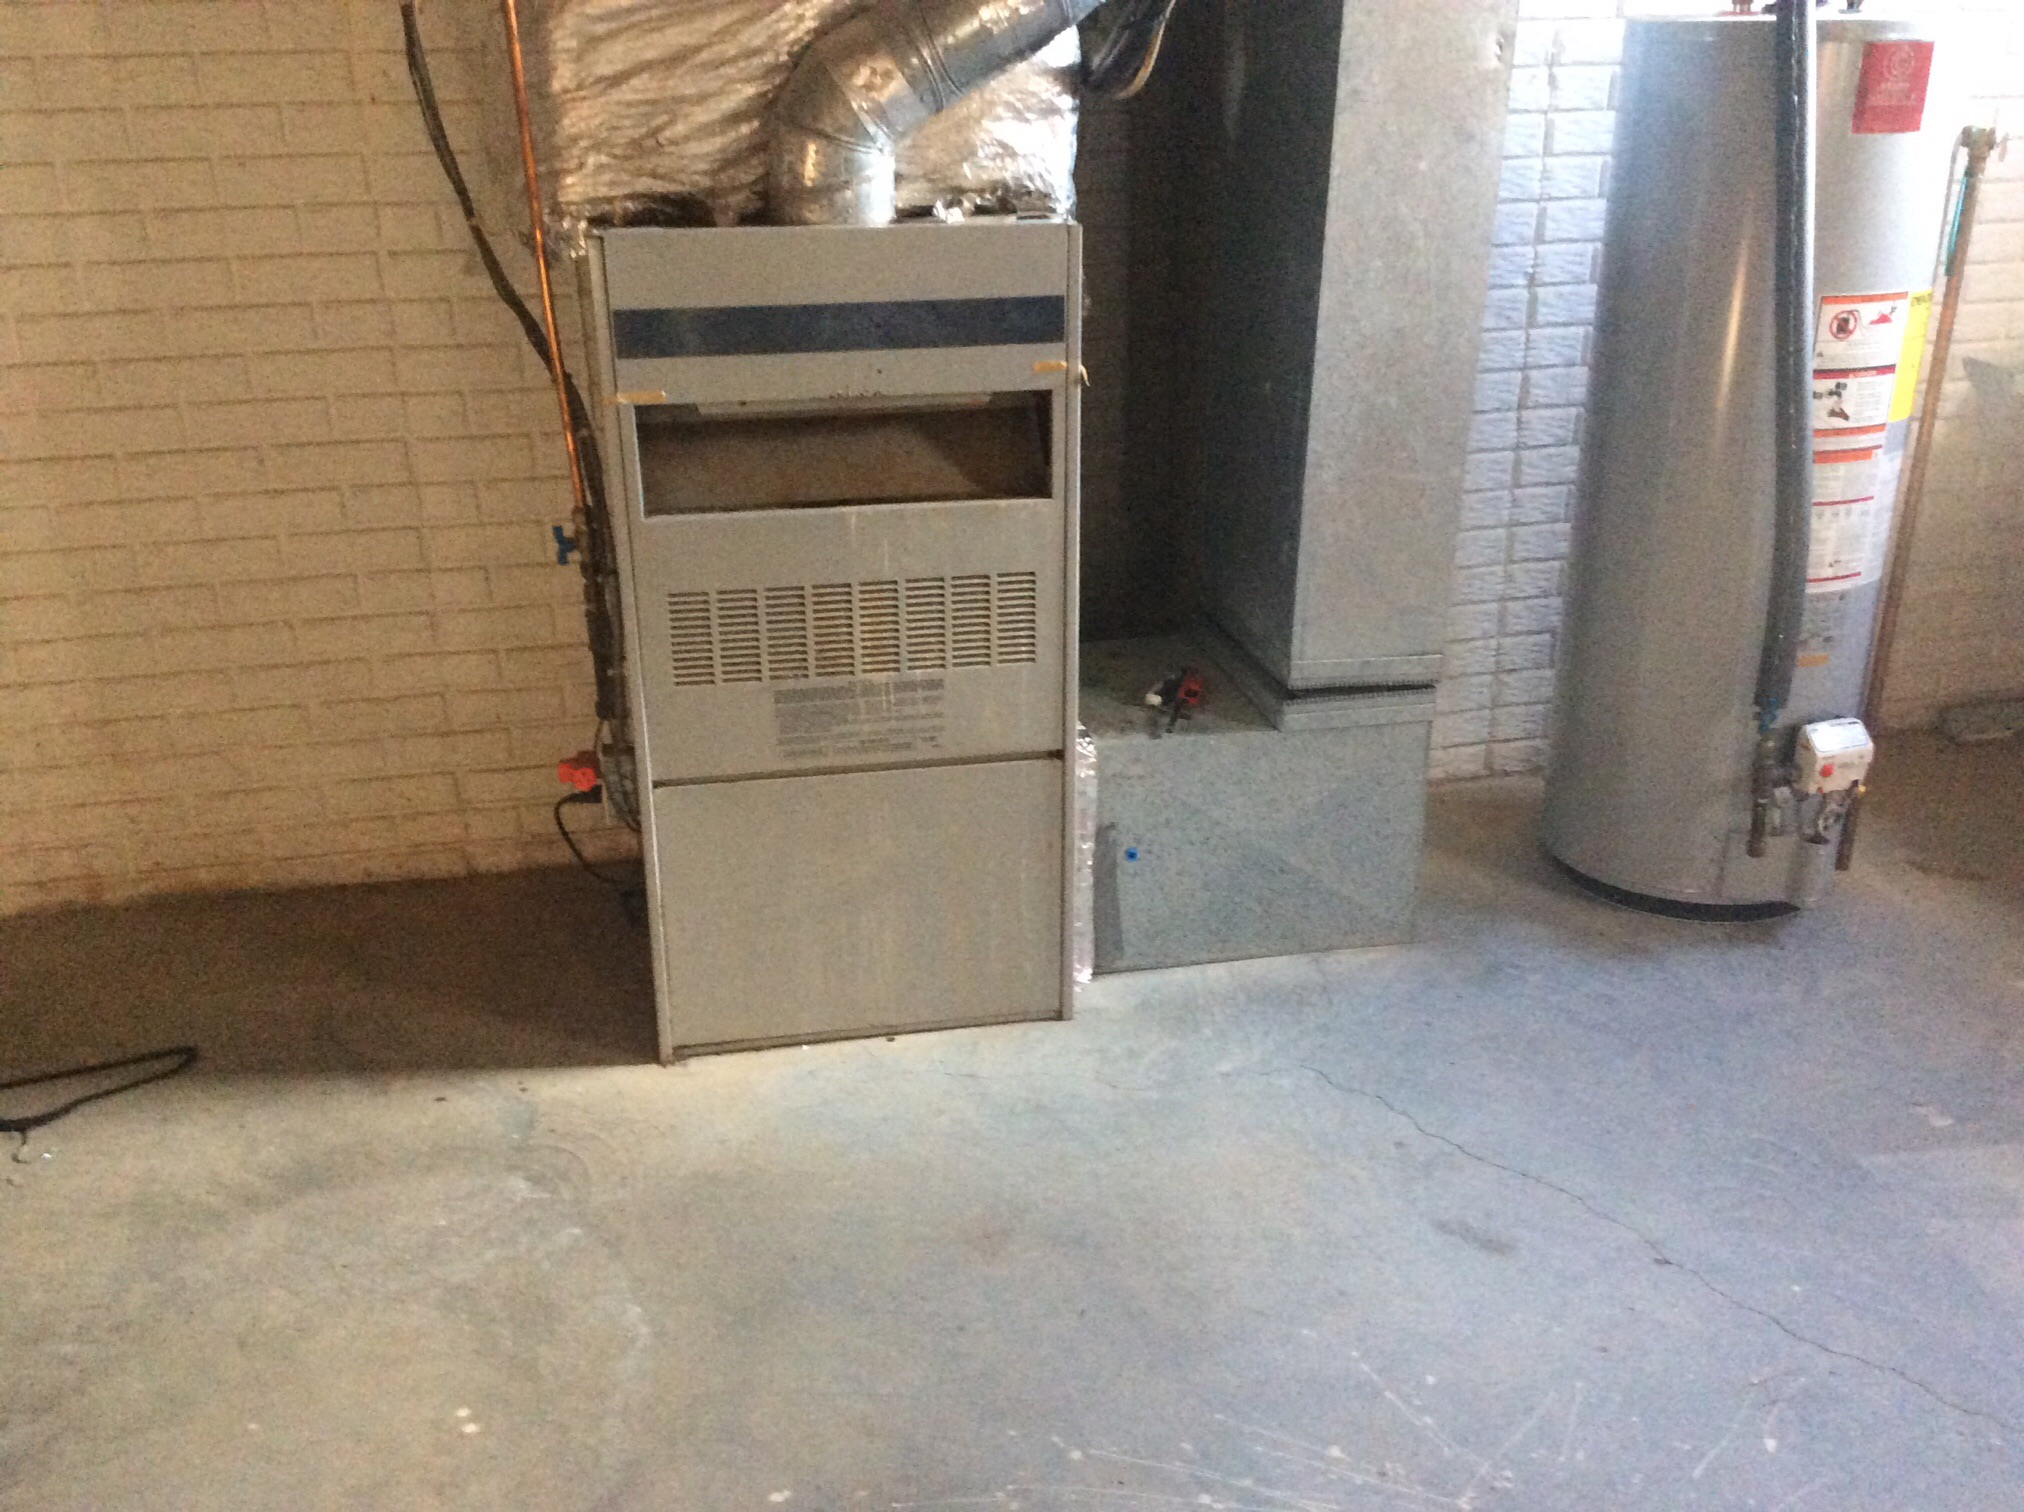 Gas Furnace-28 Years old